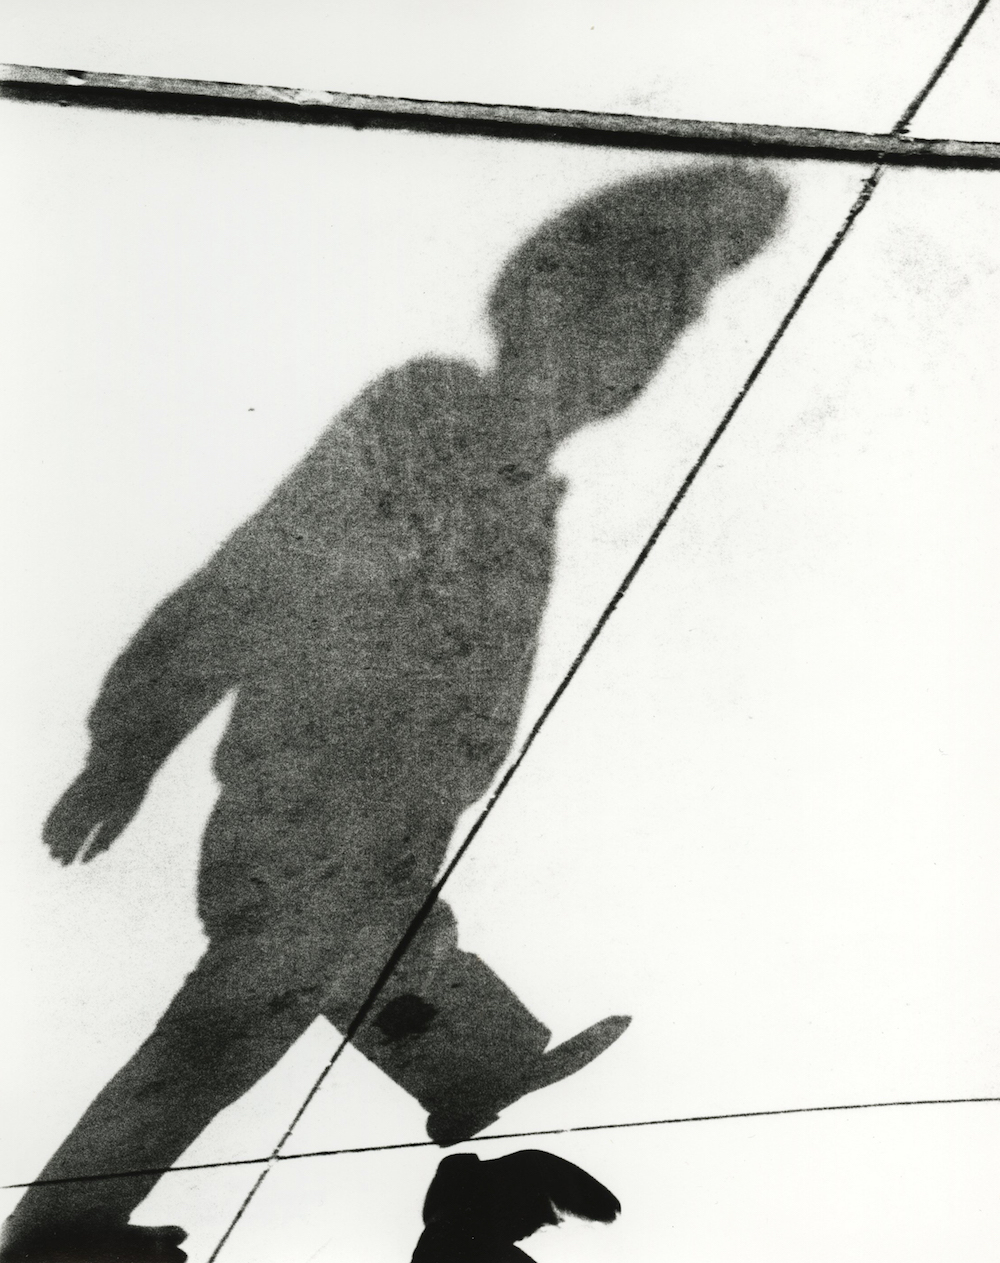 Man in Hat, Shadow Series, Chicago, 1951